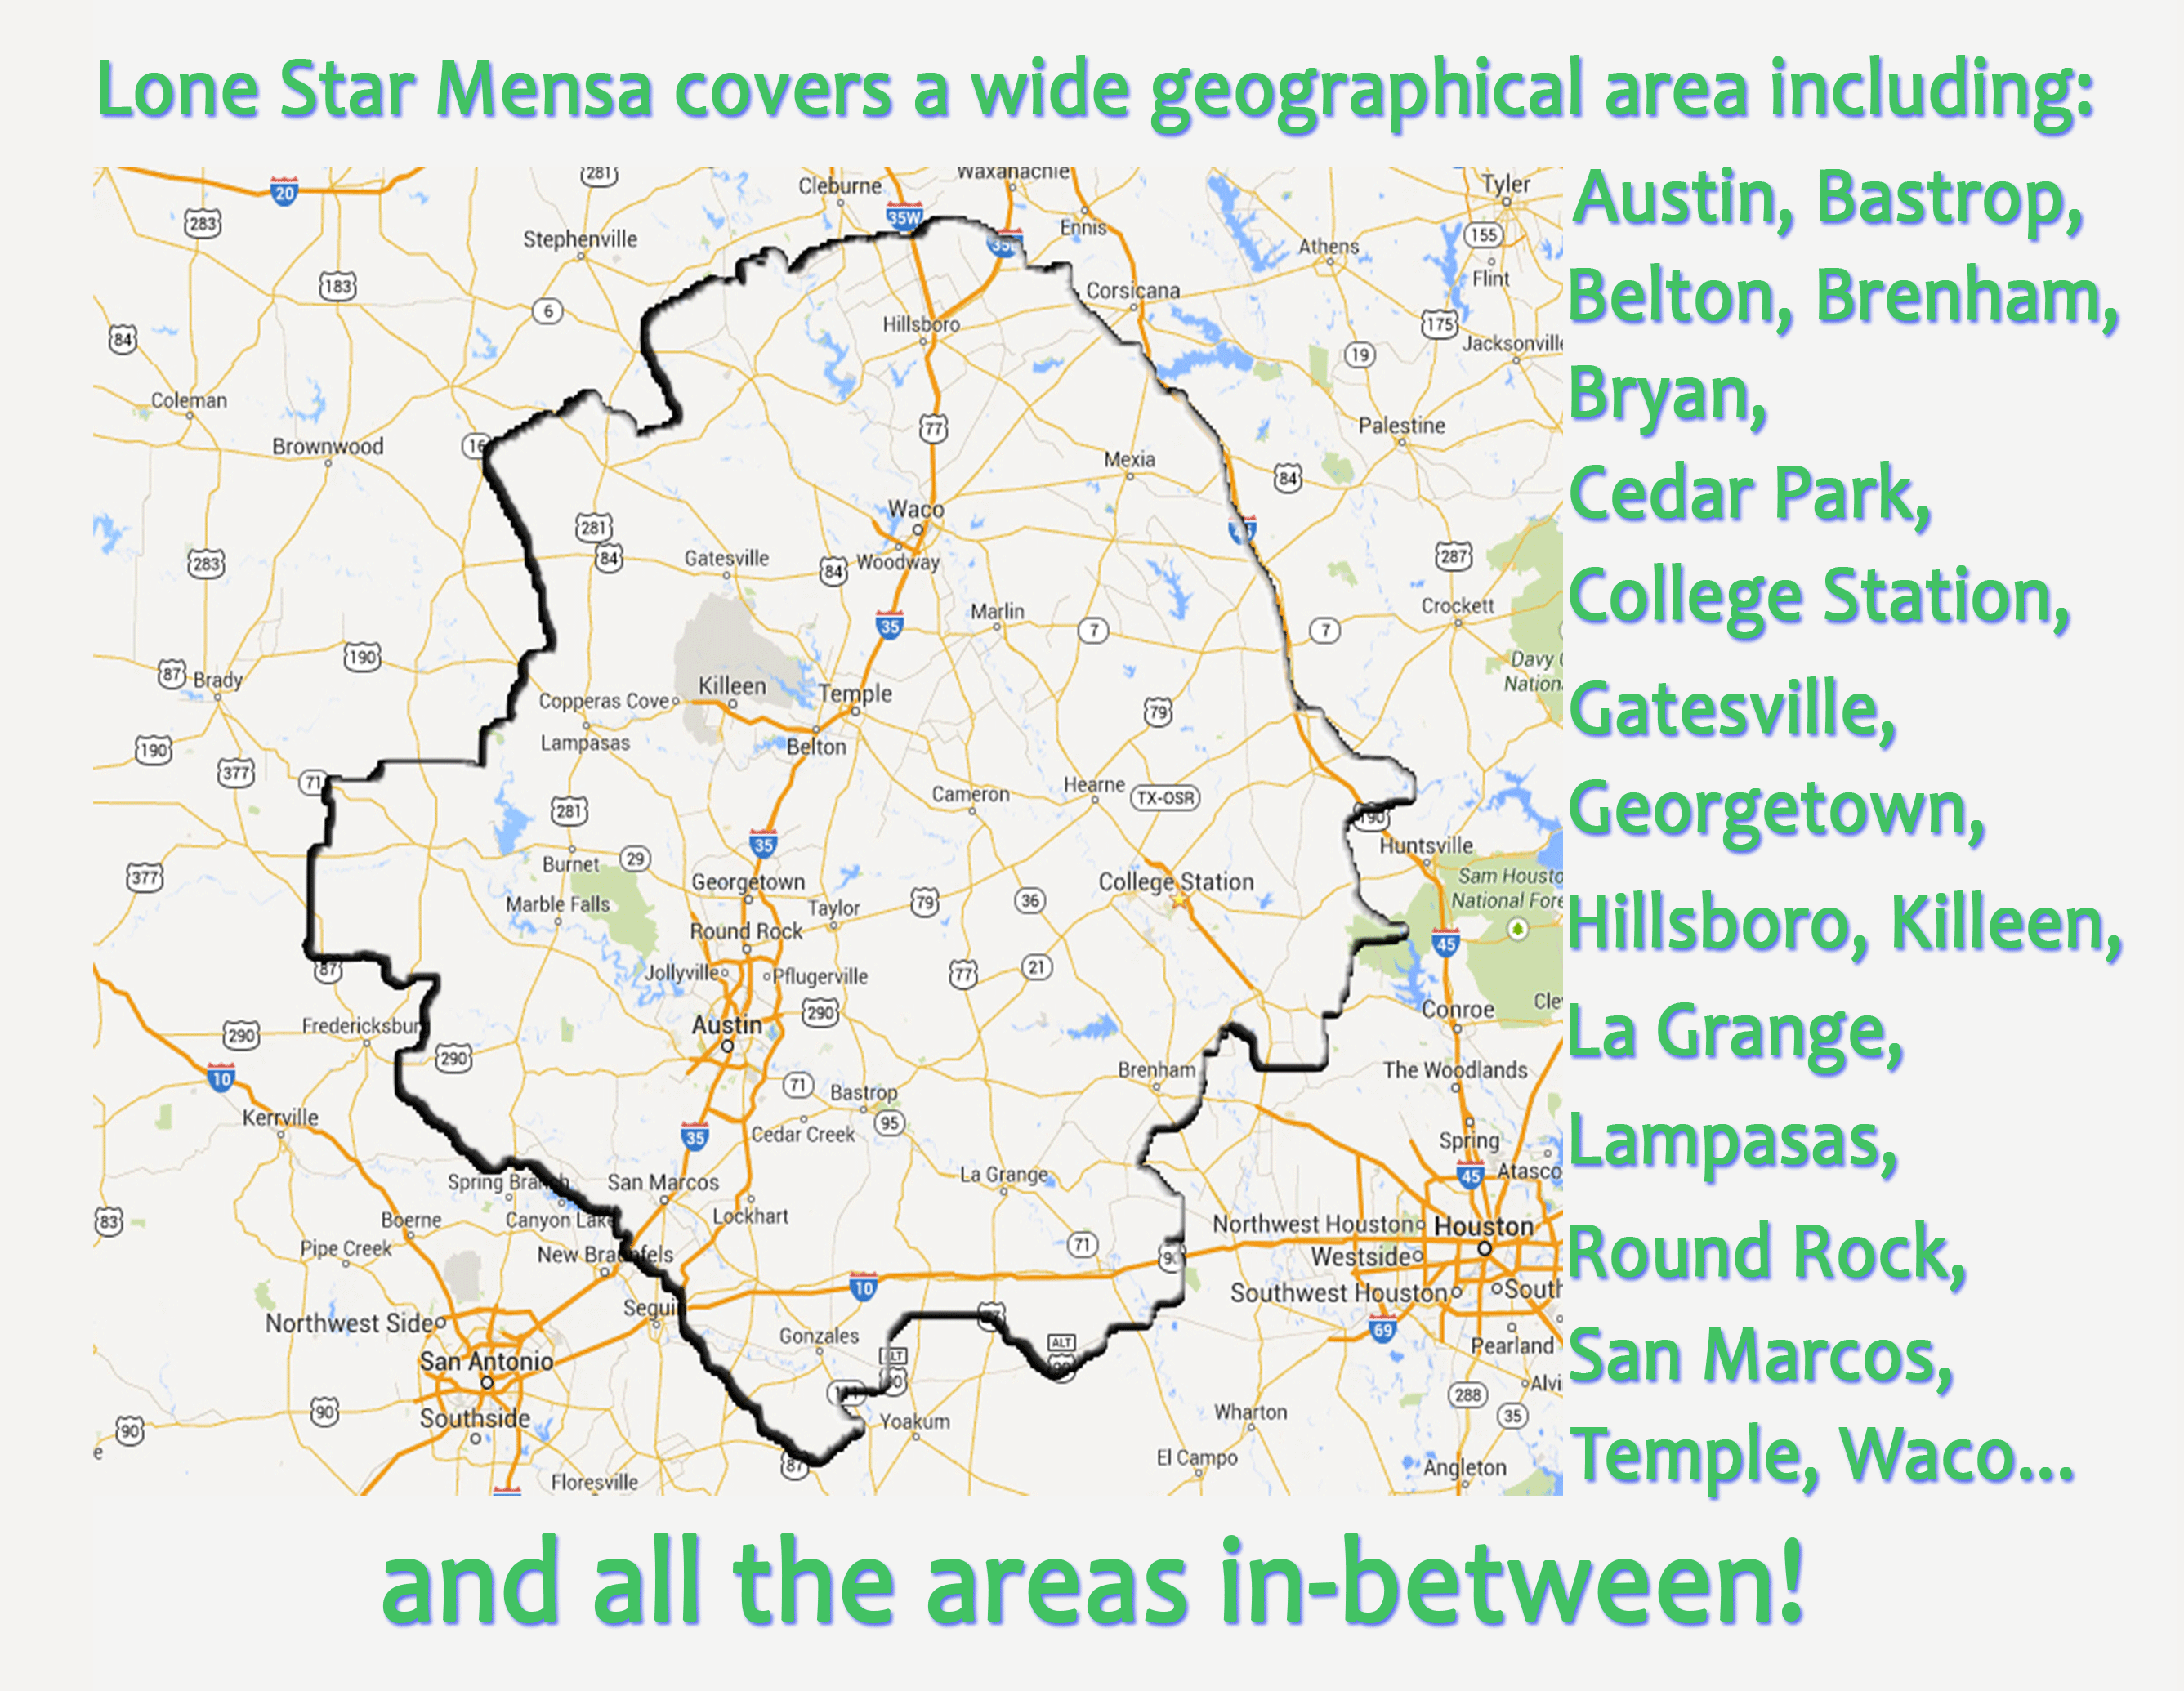 Lone Star Mensa covers a wide geographical area including: Austin, Bastrop, Belton, Brenham, Bryan, Cedar Park, College Station, Gatesville, Georgetown, Hillsboro, Killeen, La Grange, Lampasas, Round Rock, San Marcos, Temple, Waco... and all the areas in-between!